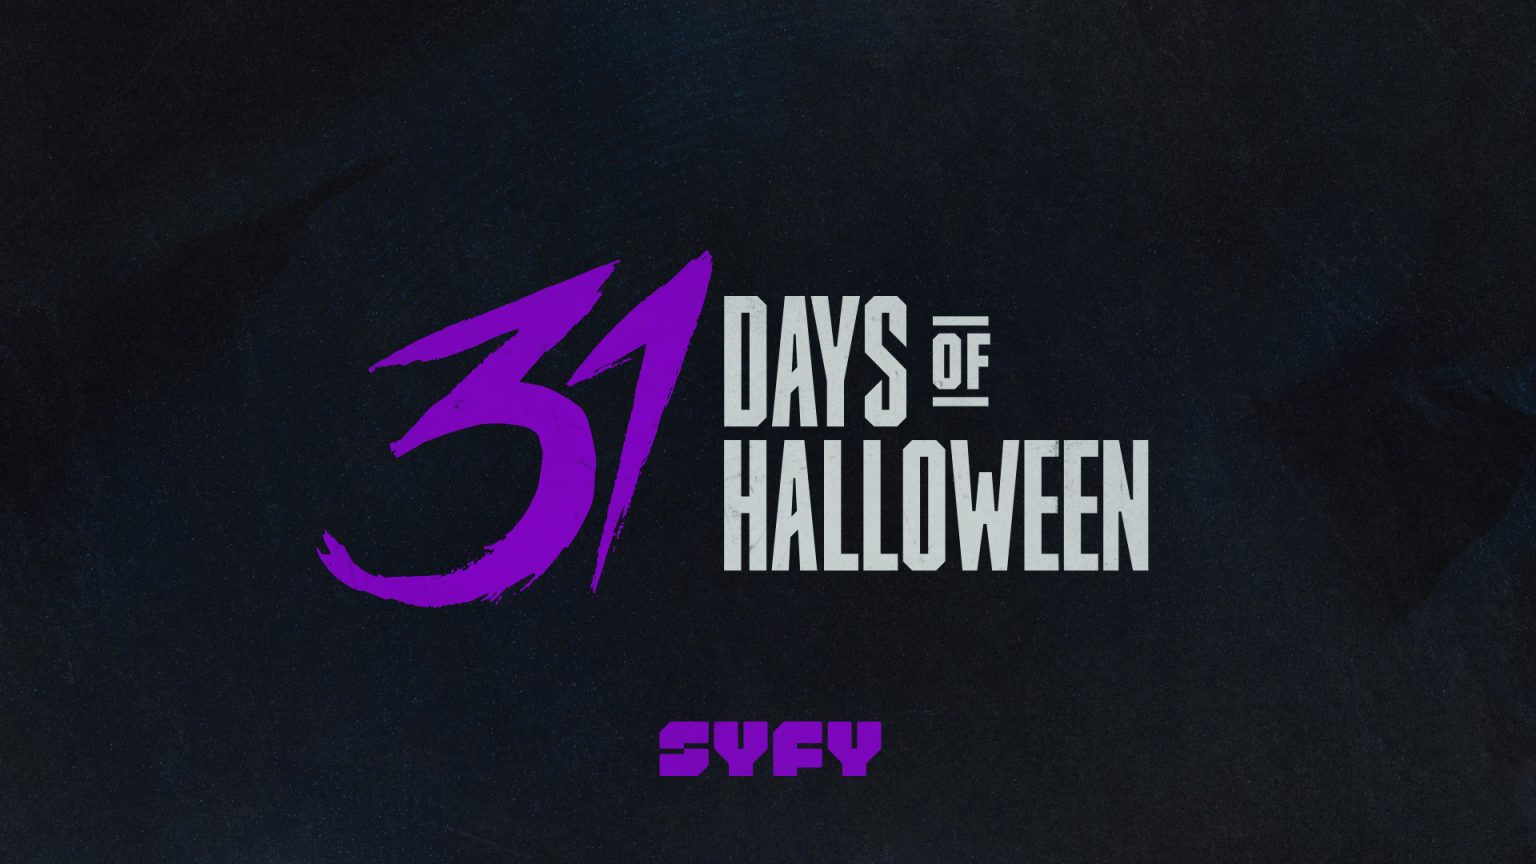 Syfy Celebrates 10 Year Anniversary of "31 Days of Halloween" with